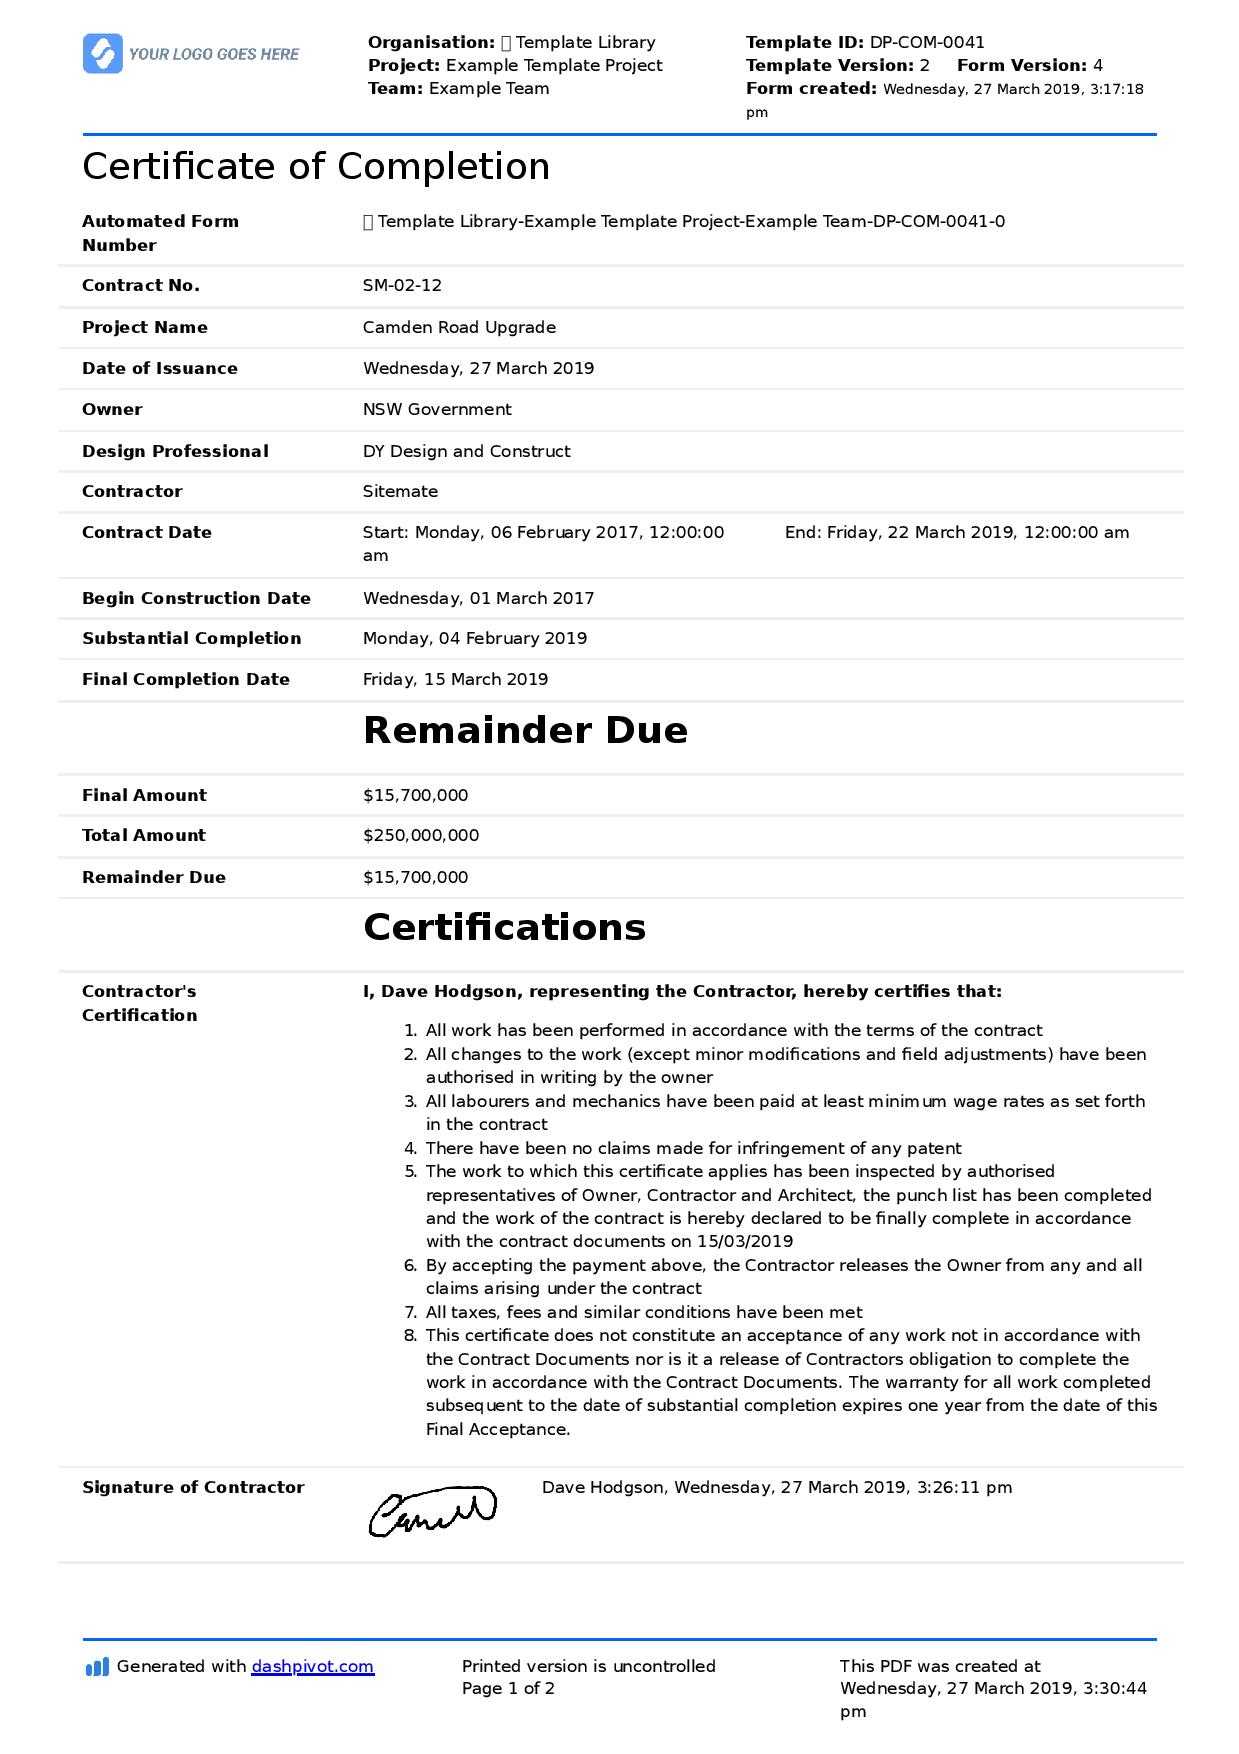 Certificate Of Completion For Construction (Free Template + Throughout Certificate Of Completion Template Construction